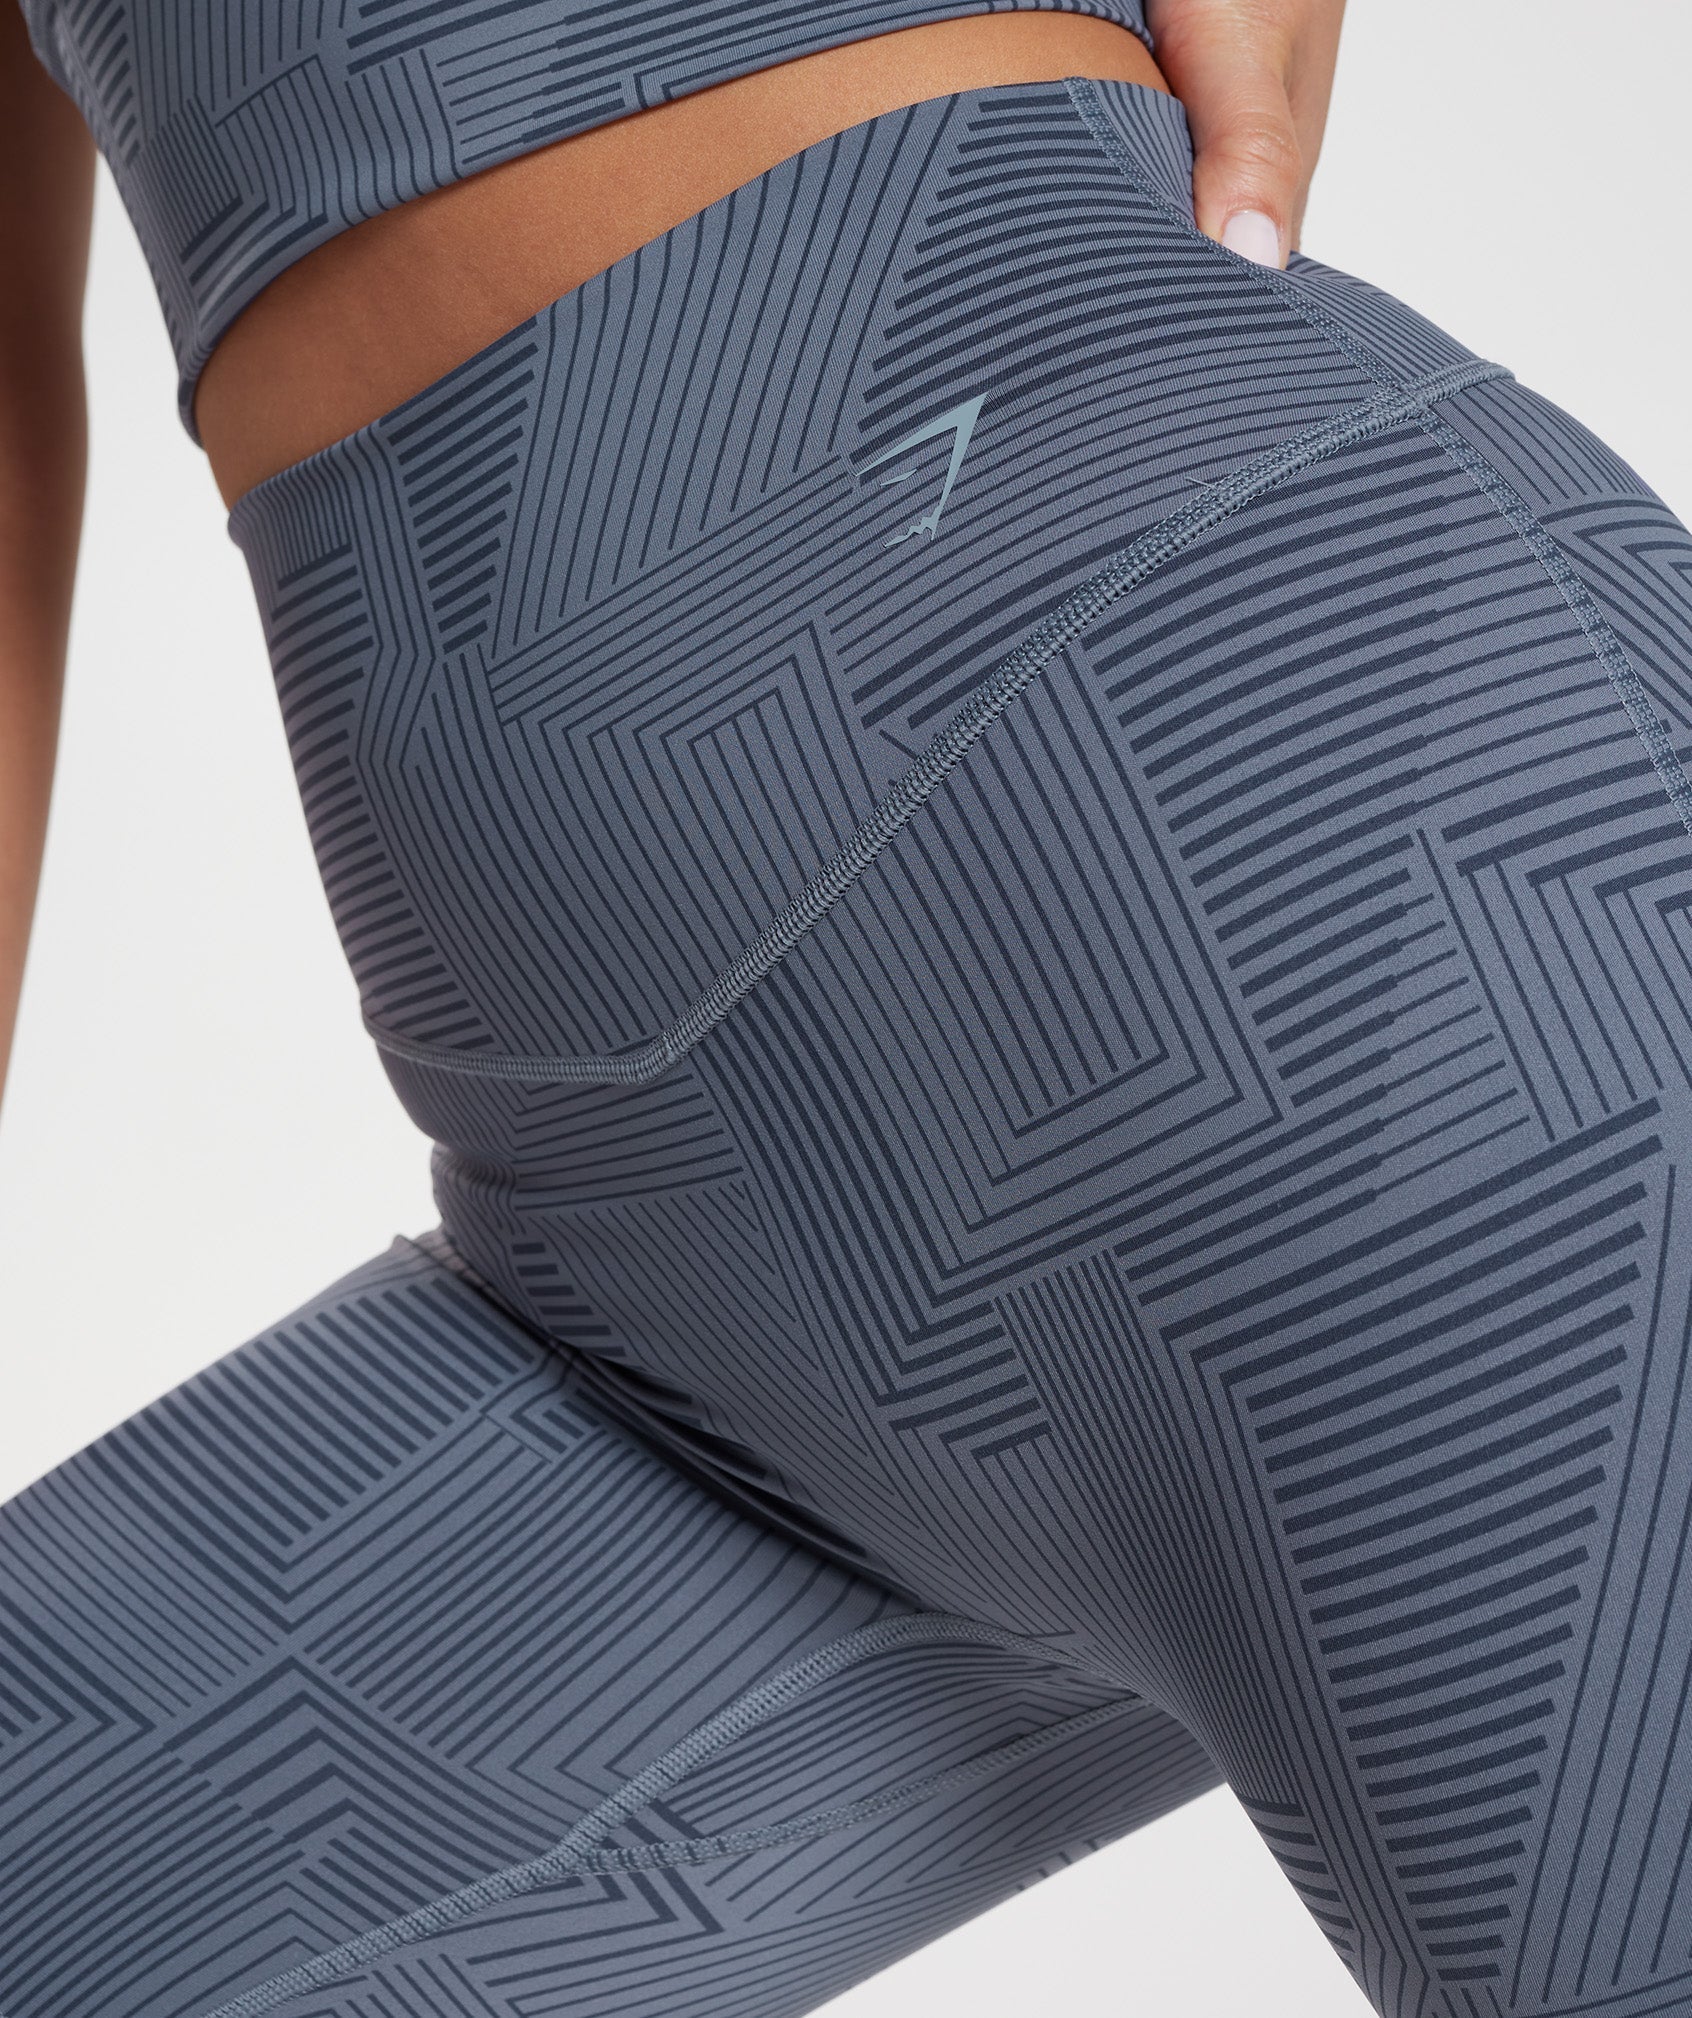 Elevate Cycling Shorts in Evening Blue